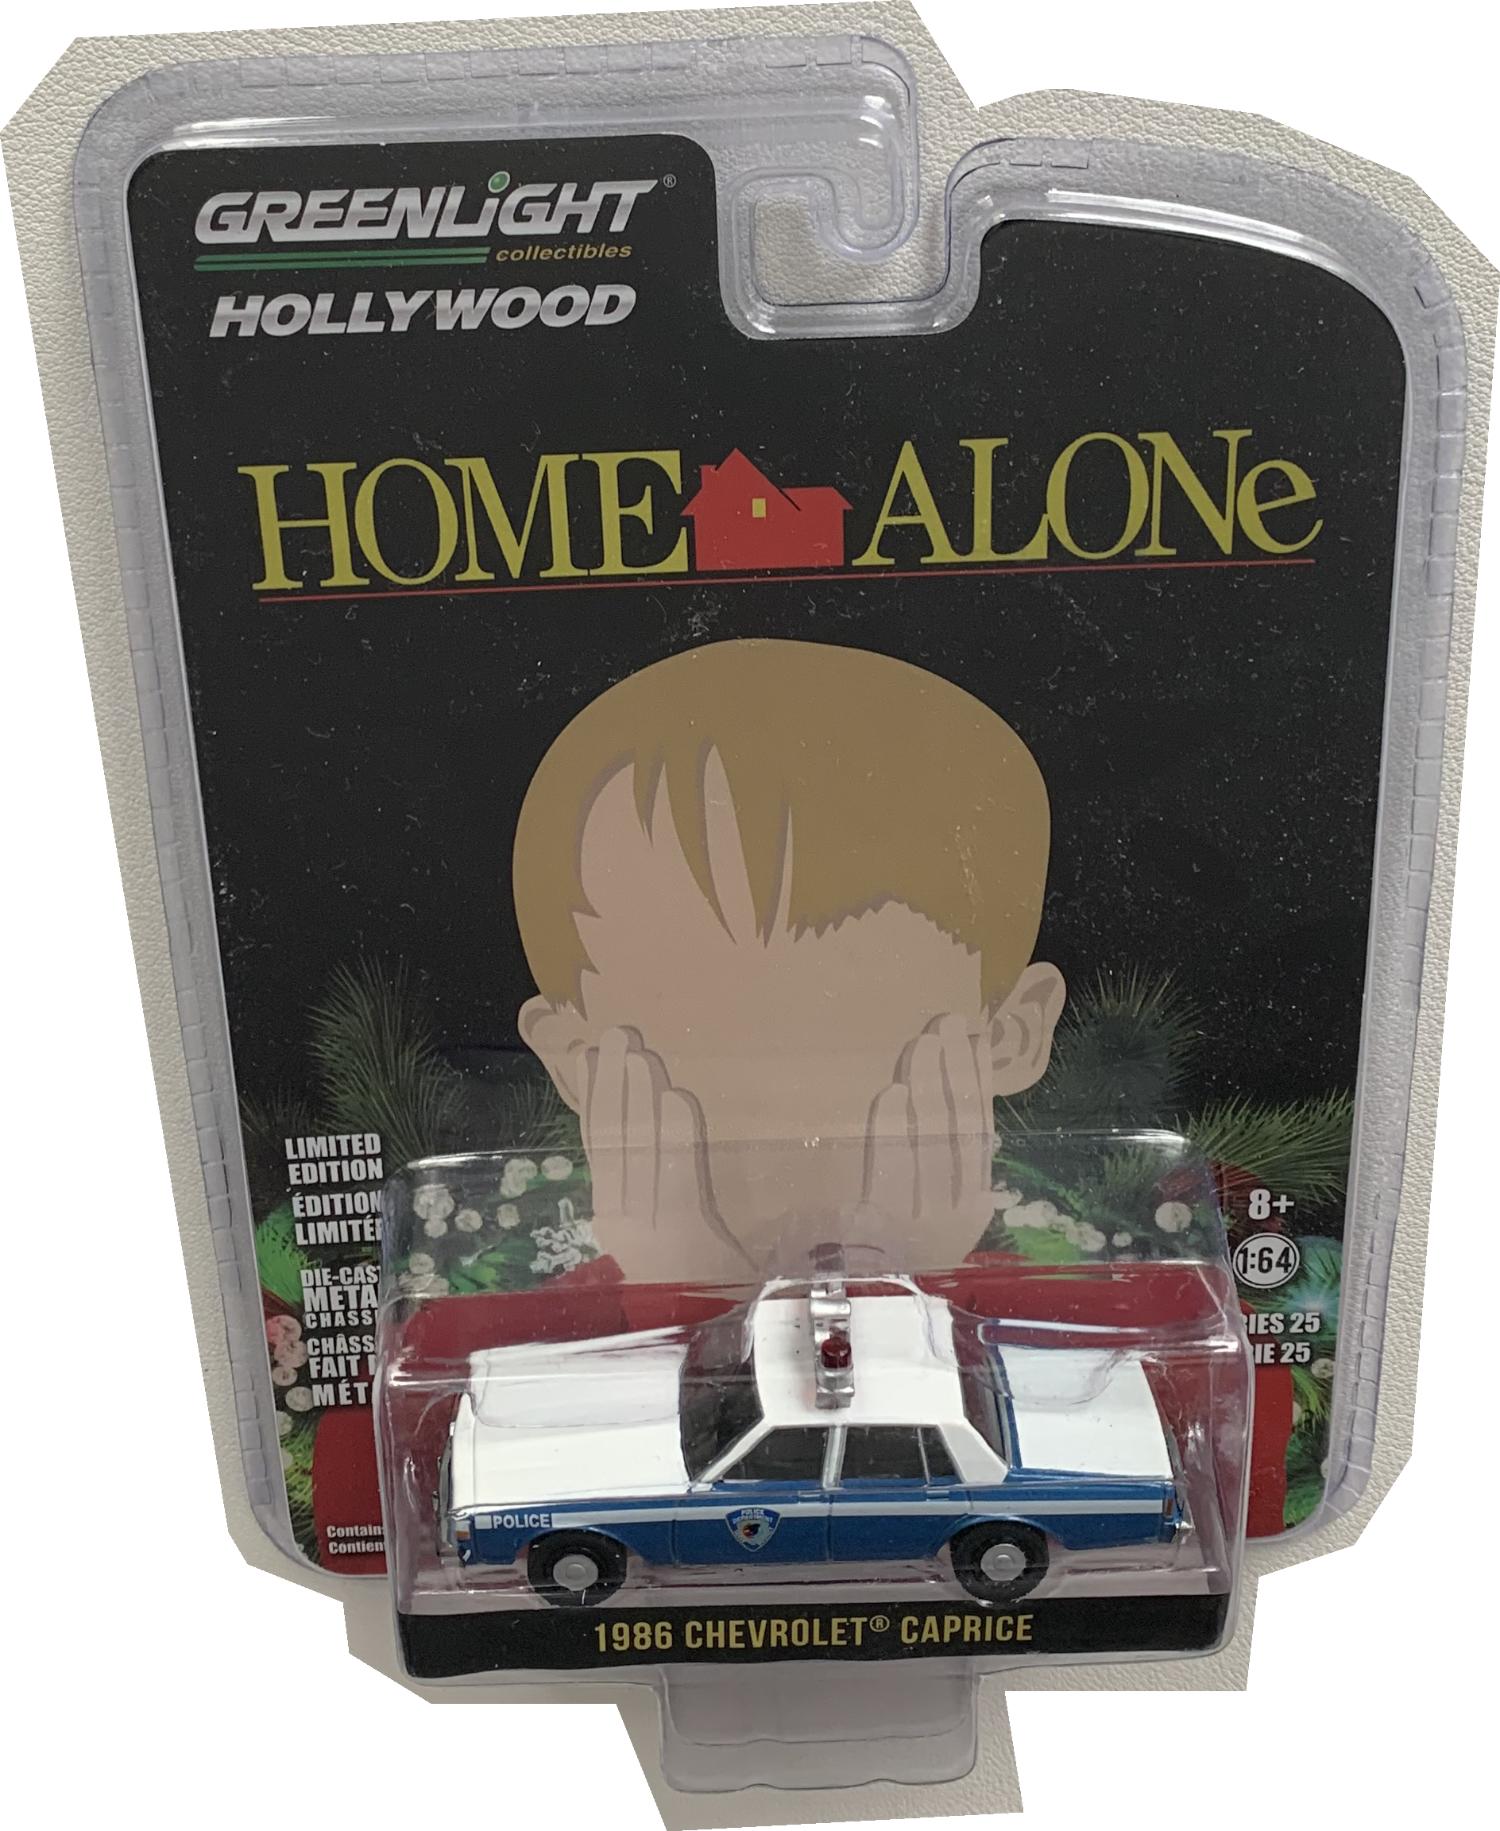 From the Film Home Alone 1986 Chevrolet Caprice in blue 1:64 scale model from Greenlight, limited edition